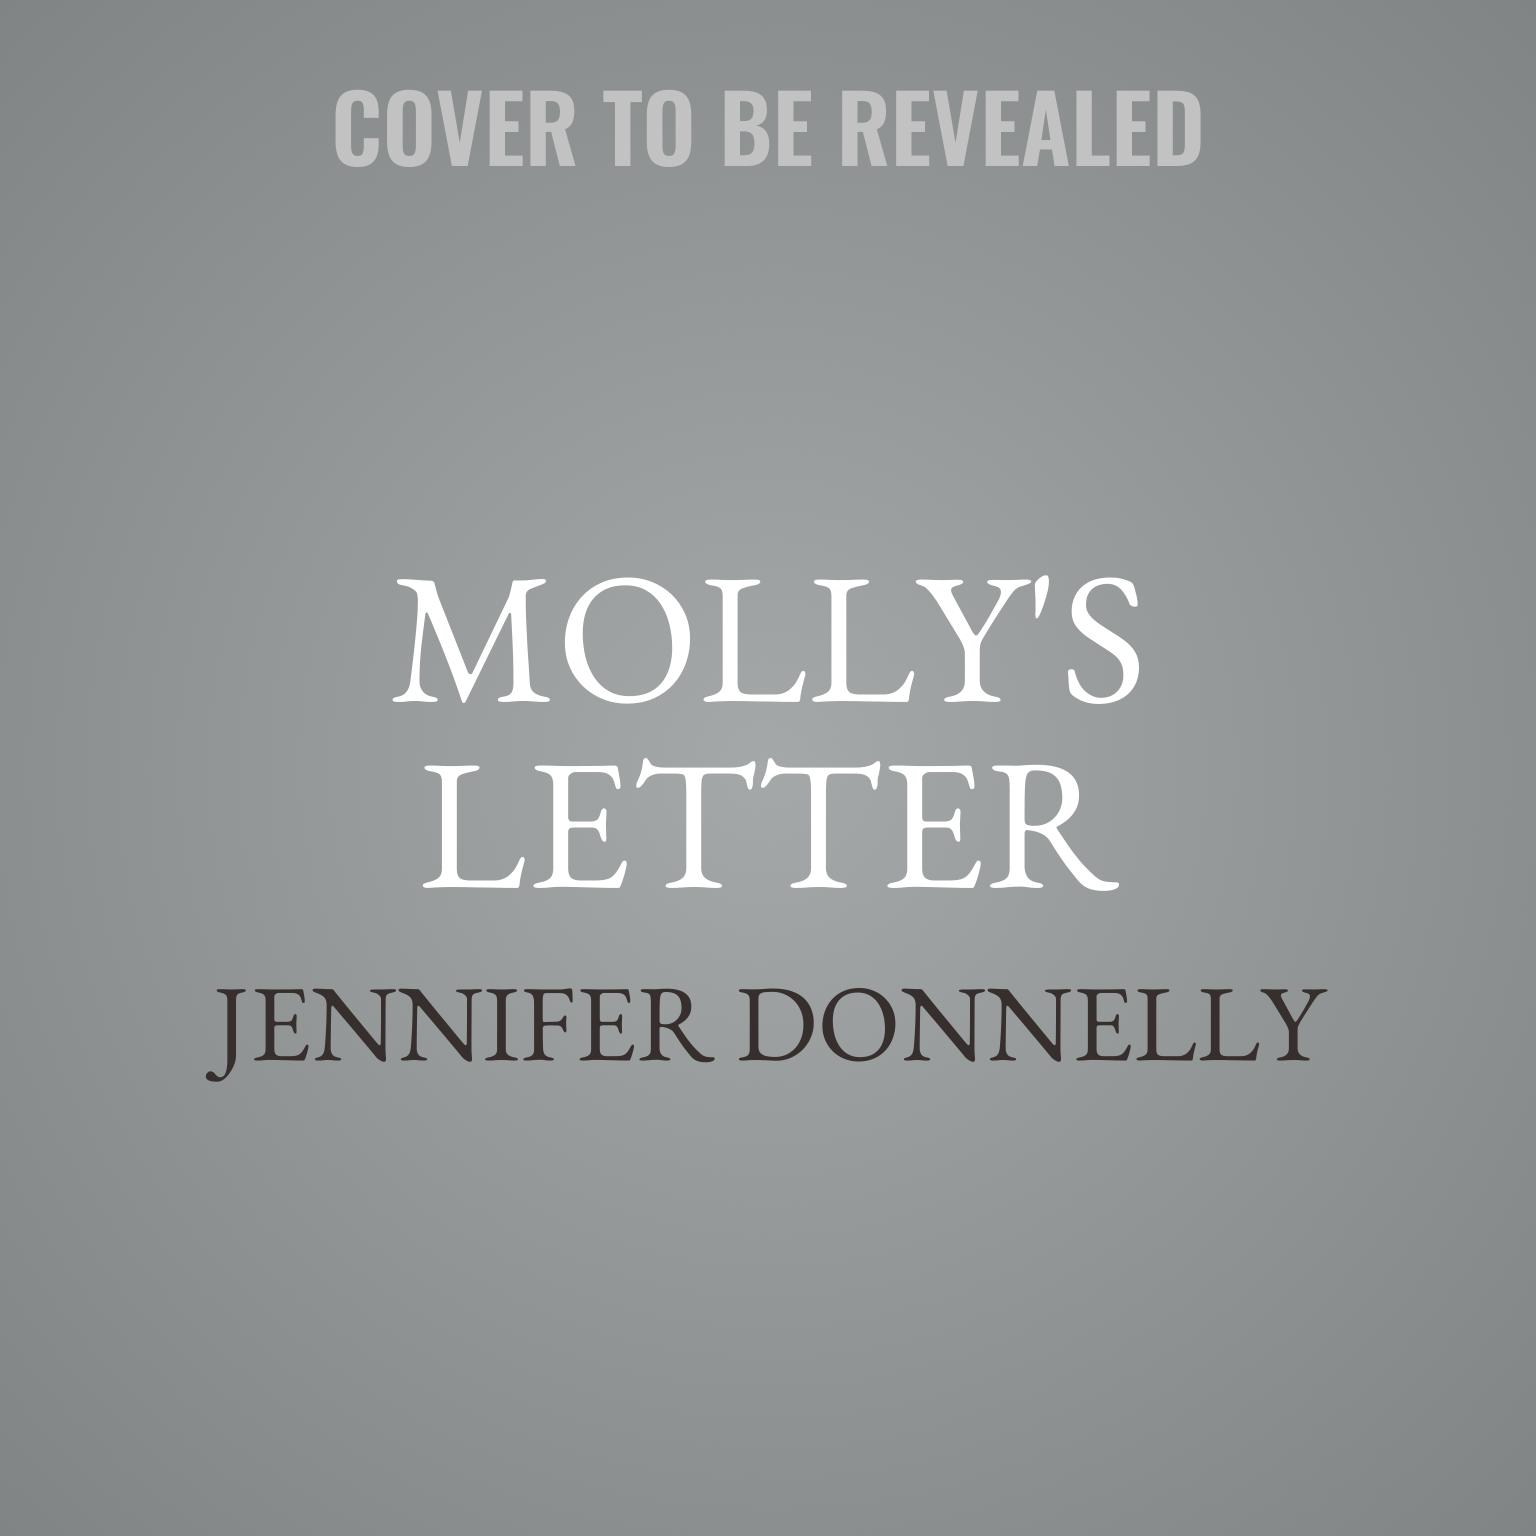 Mollys Letter: A Tea Rose Story Audiobook, by Jennifer Donnelly